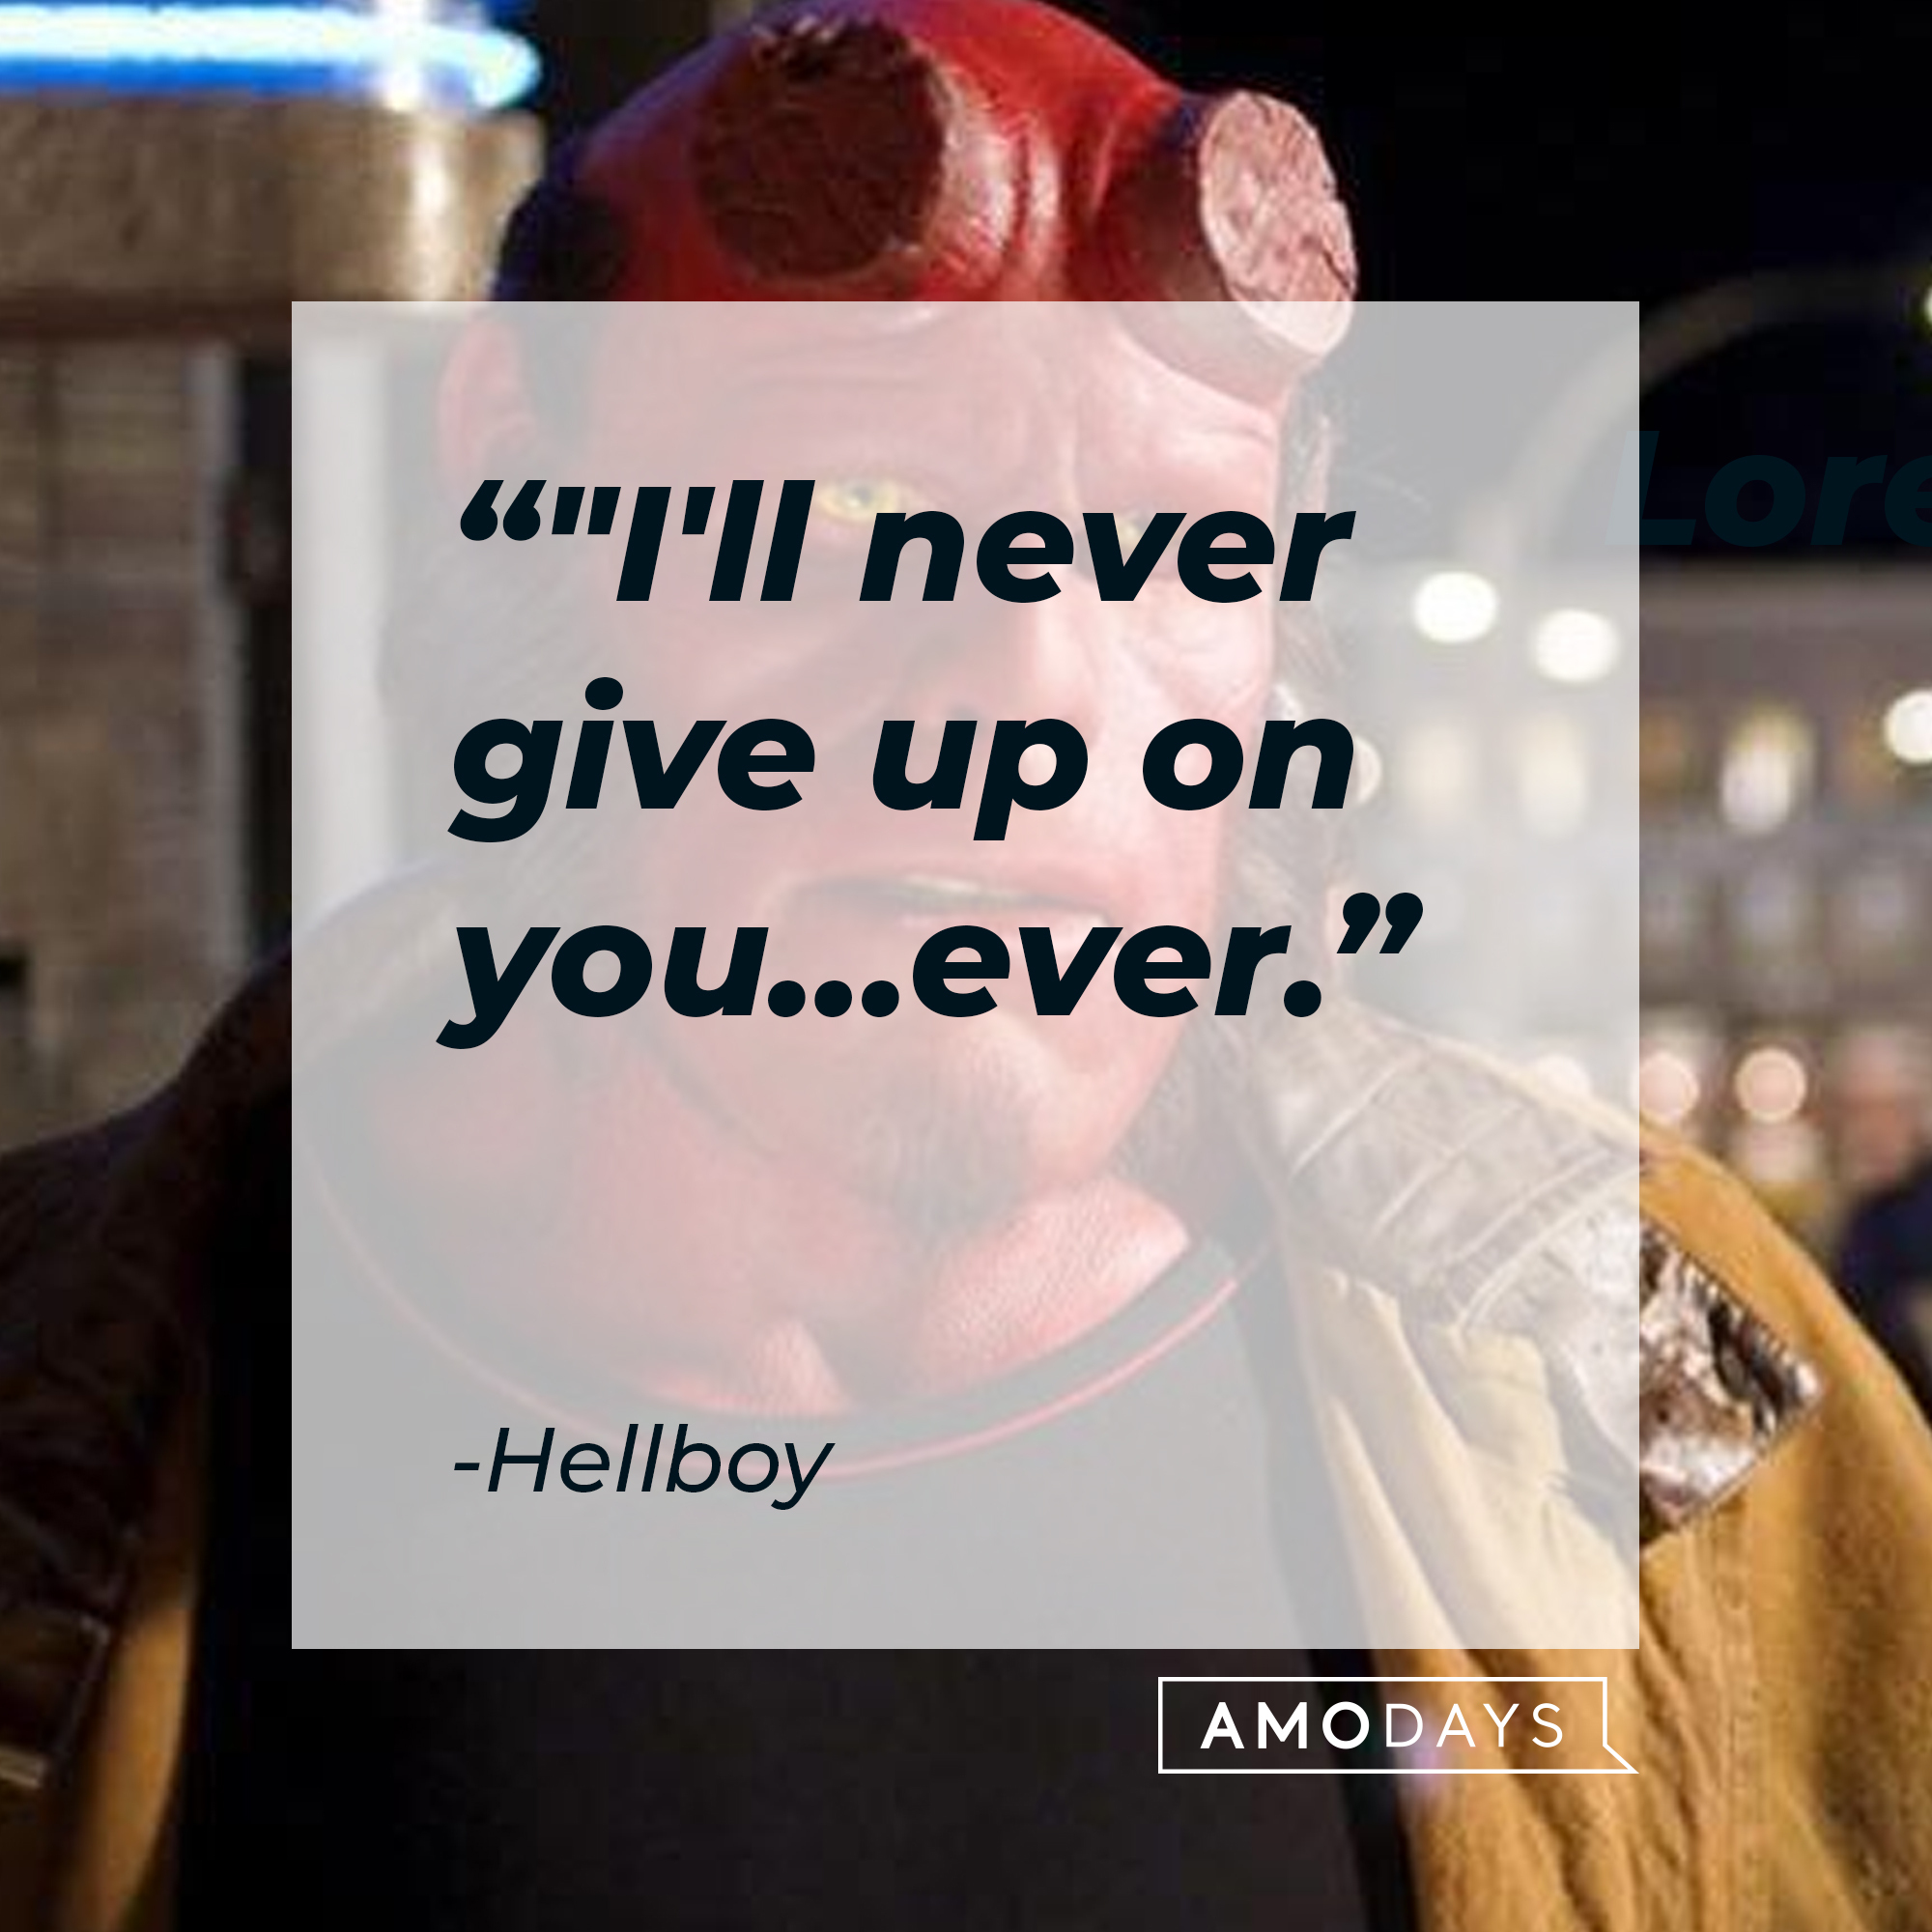 Hellboy's quote: "I'll never give up on you...ever." | Source: facebook.com/hellboymovie